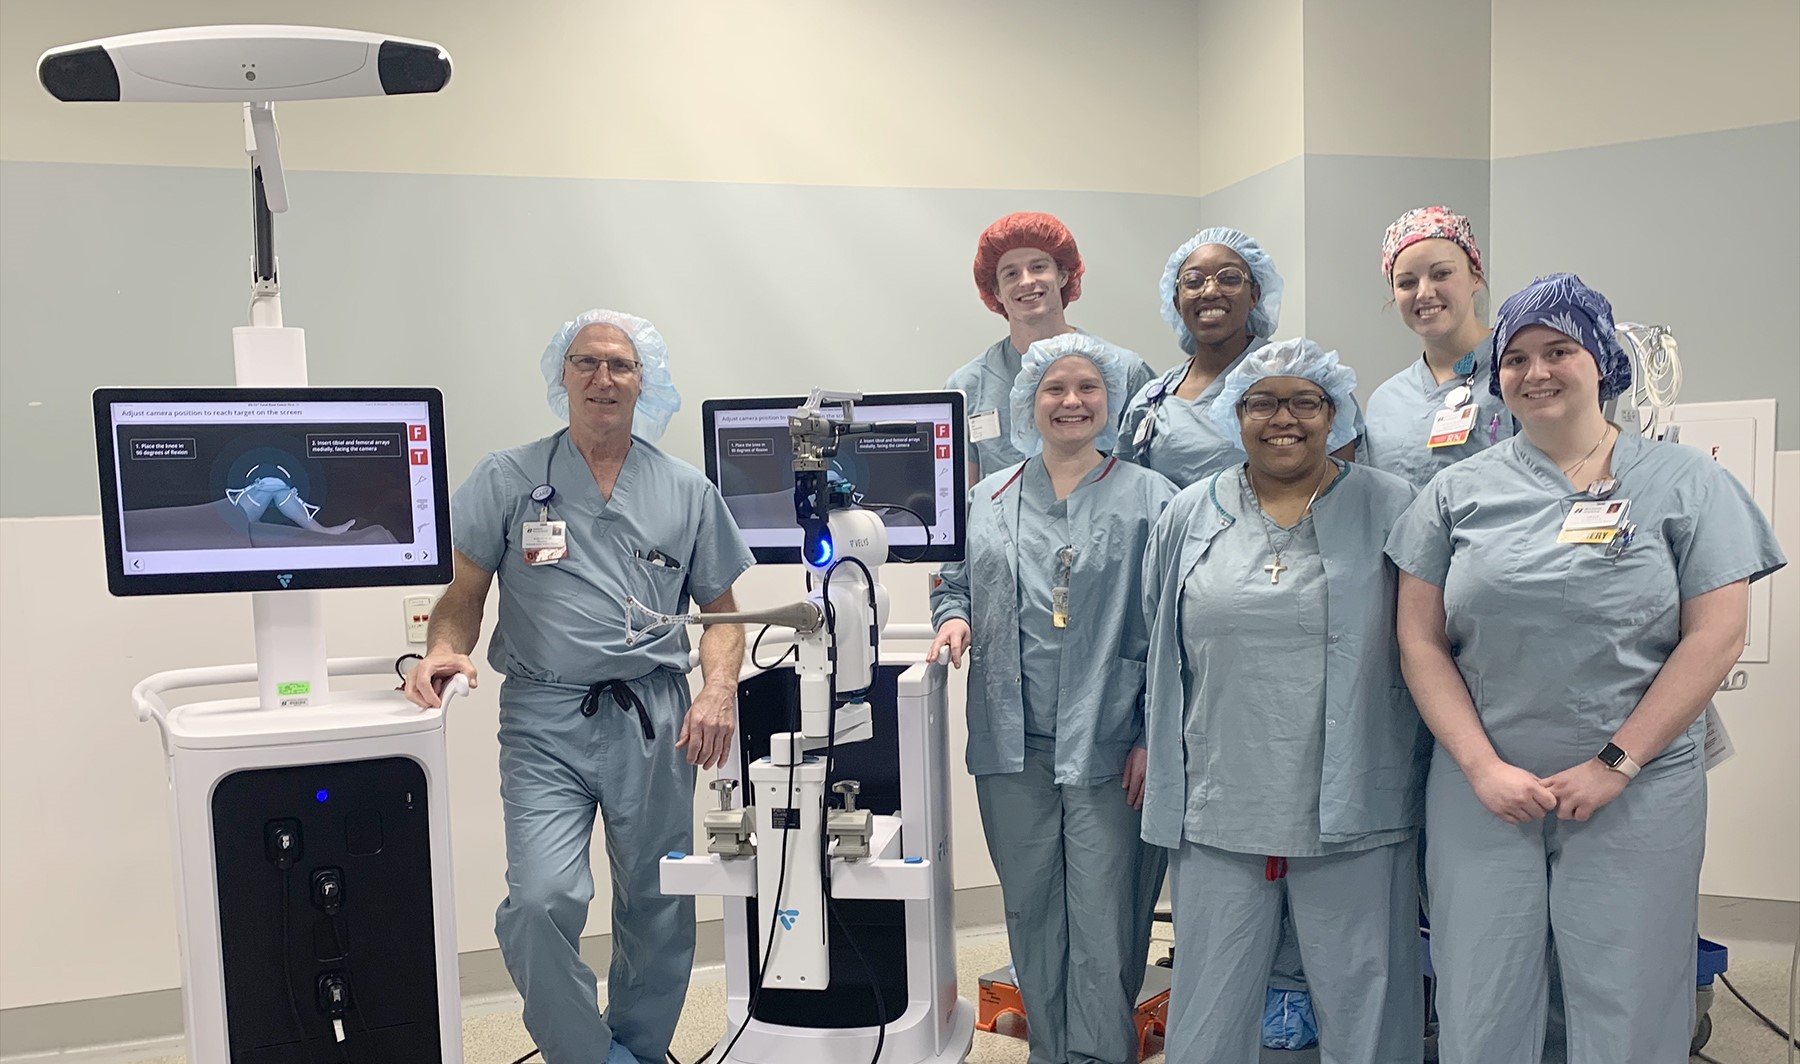 Dr Darr Luetz with the Velys knee replacement system and surgical team